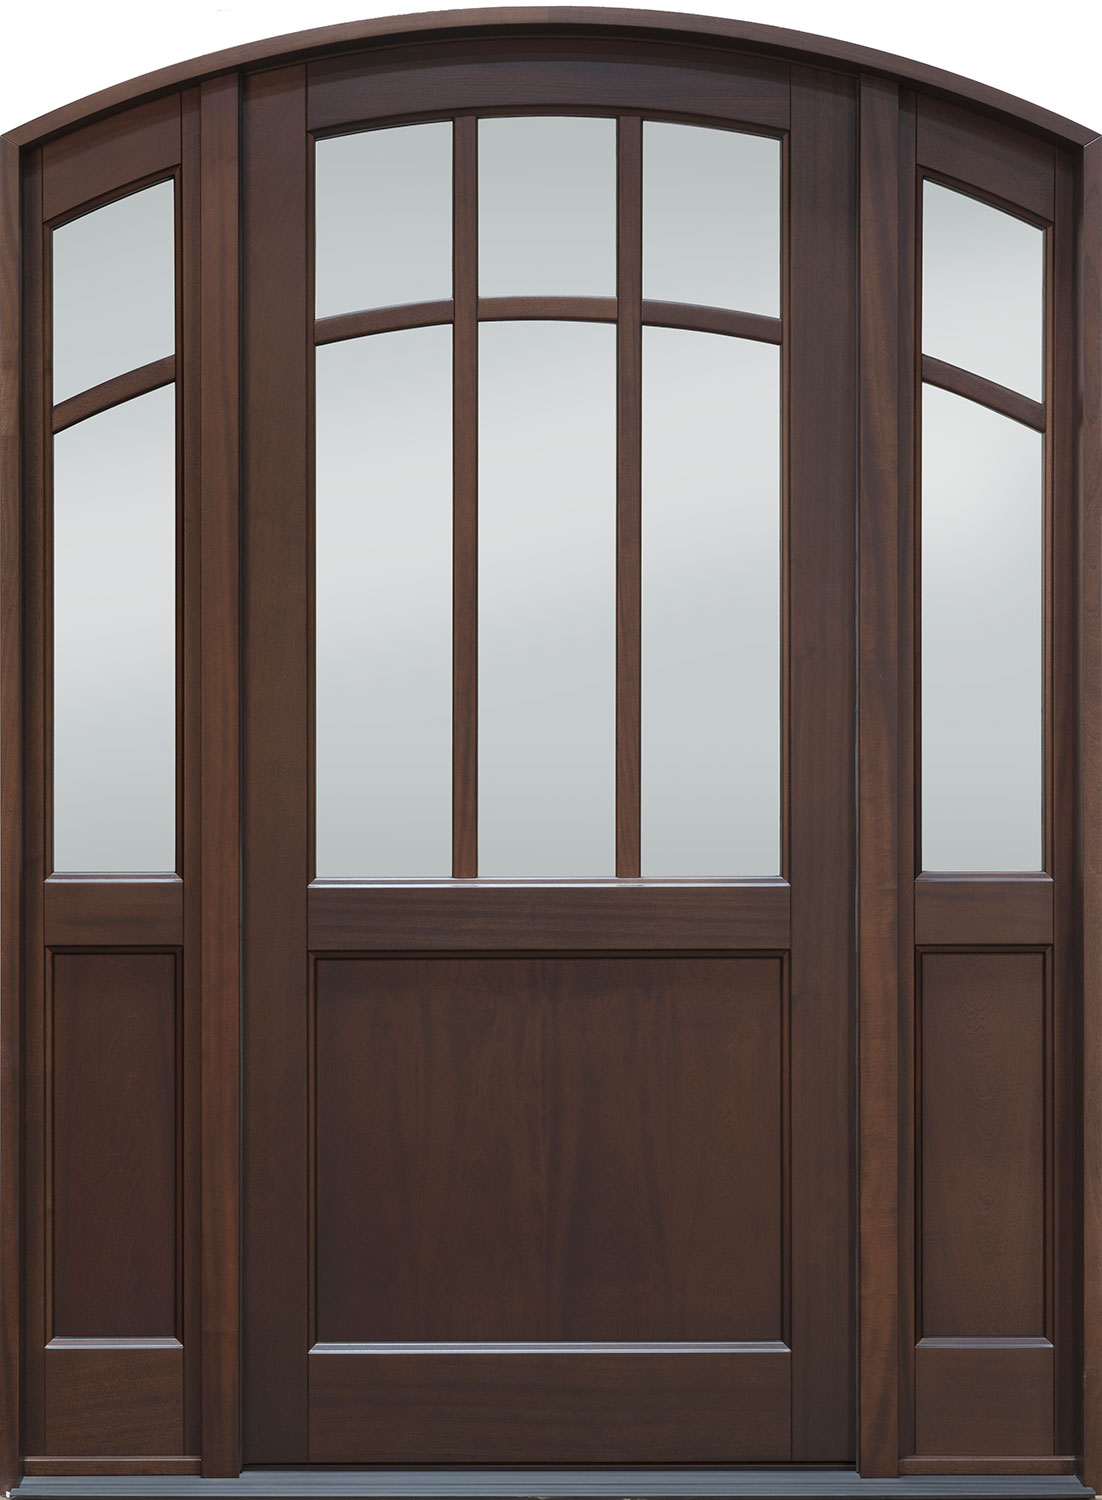 Mahogany Solid Wood Front Entry Door - Single with 2 Sidelites